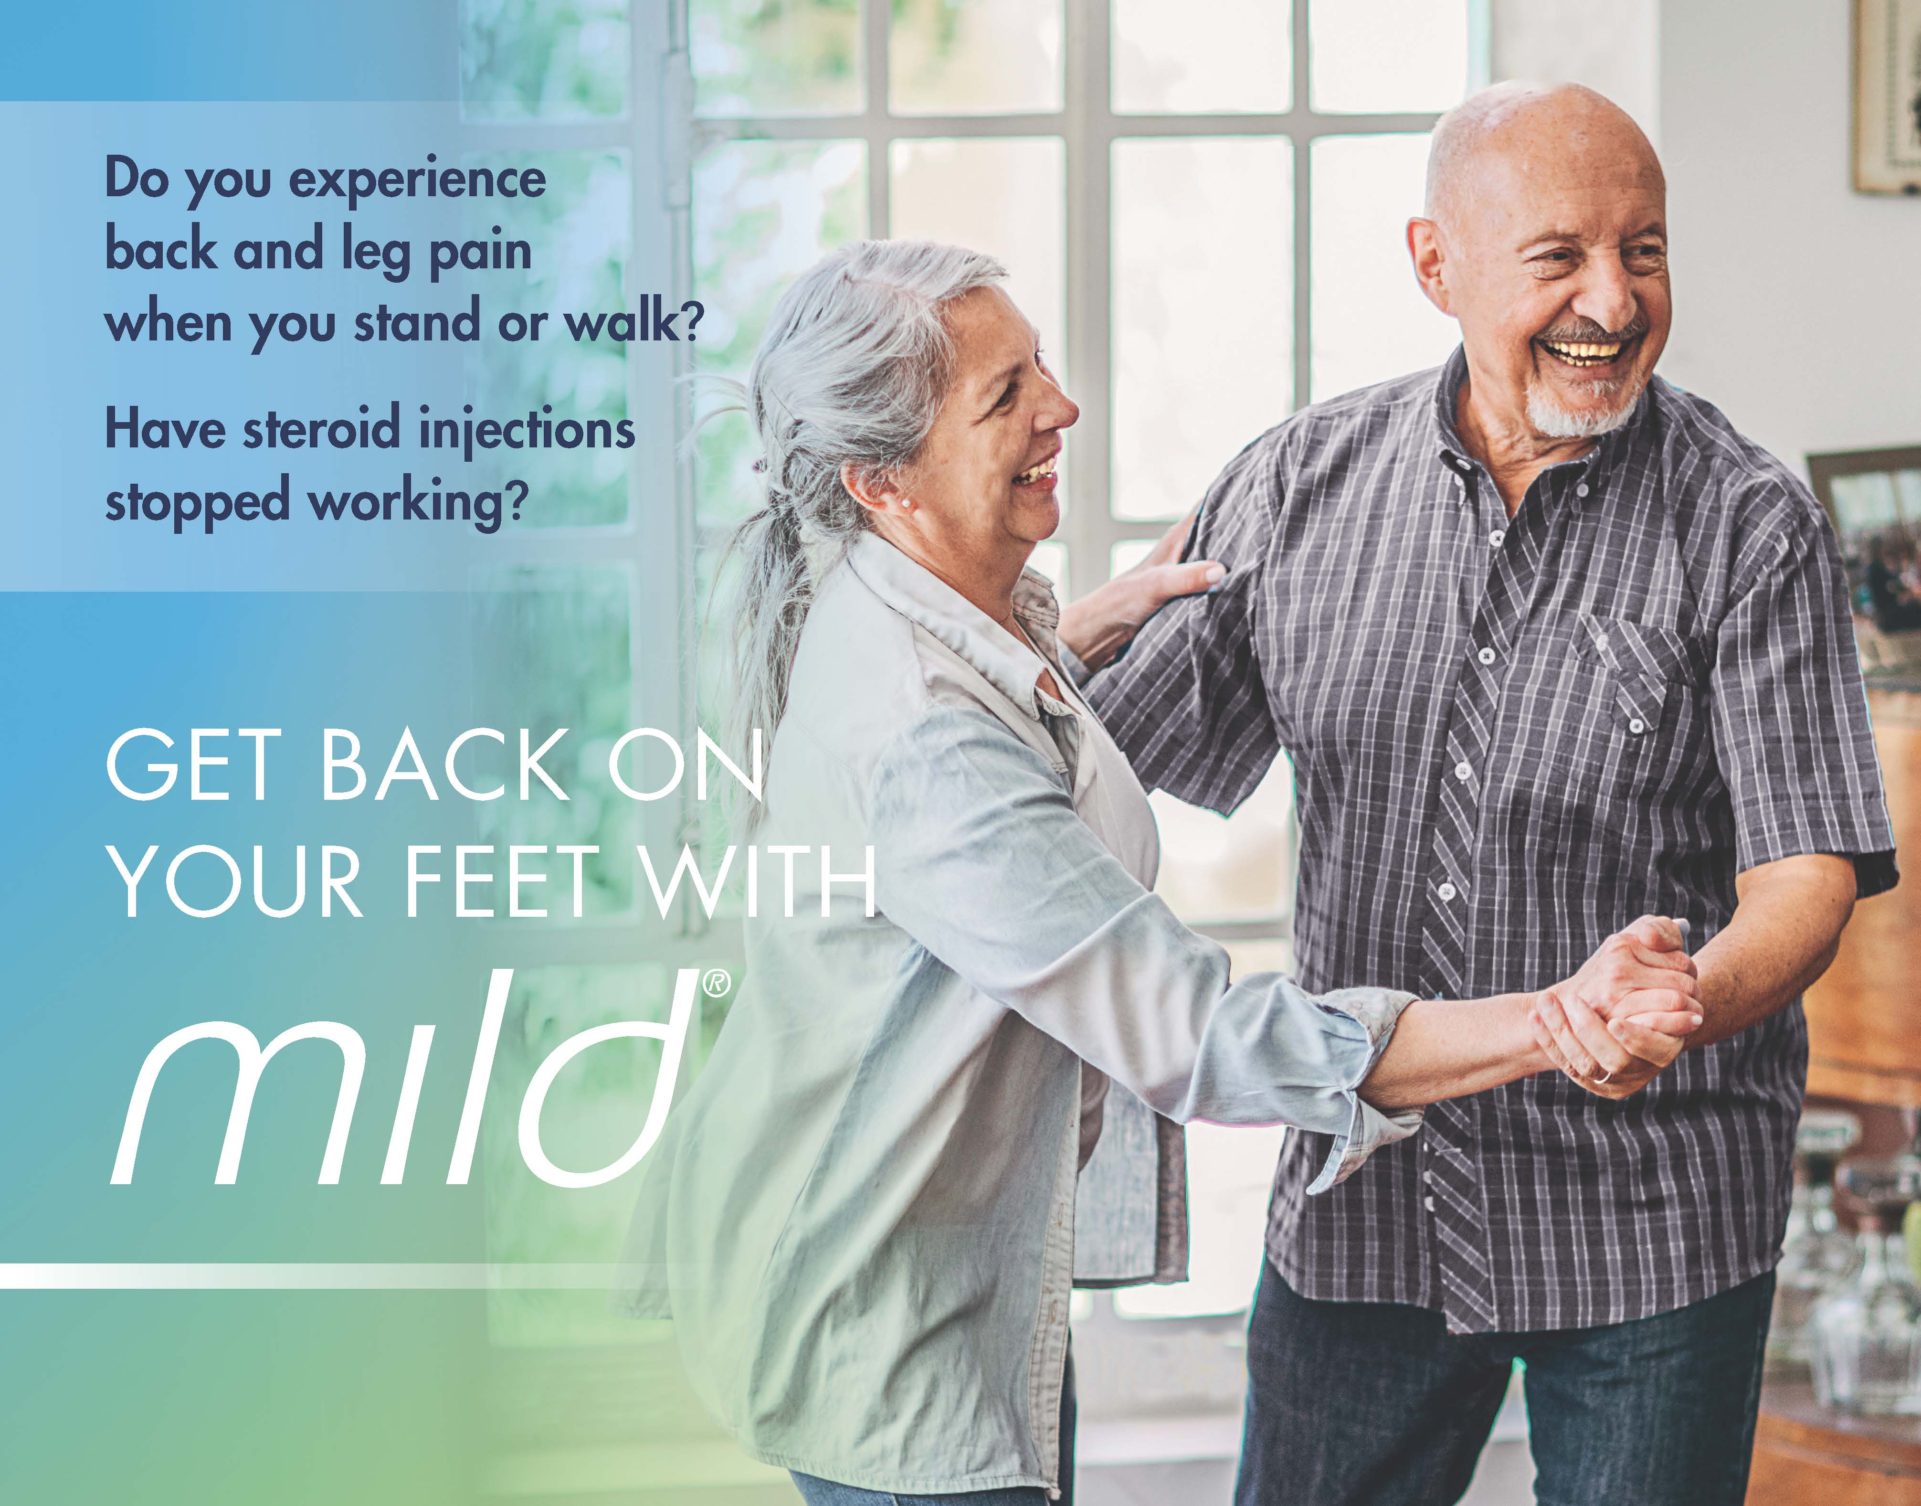 Get back on your feet with the mild® procedure 